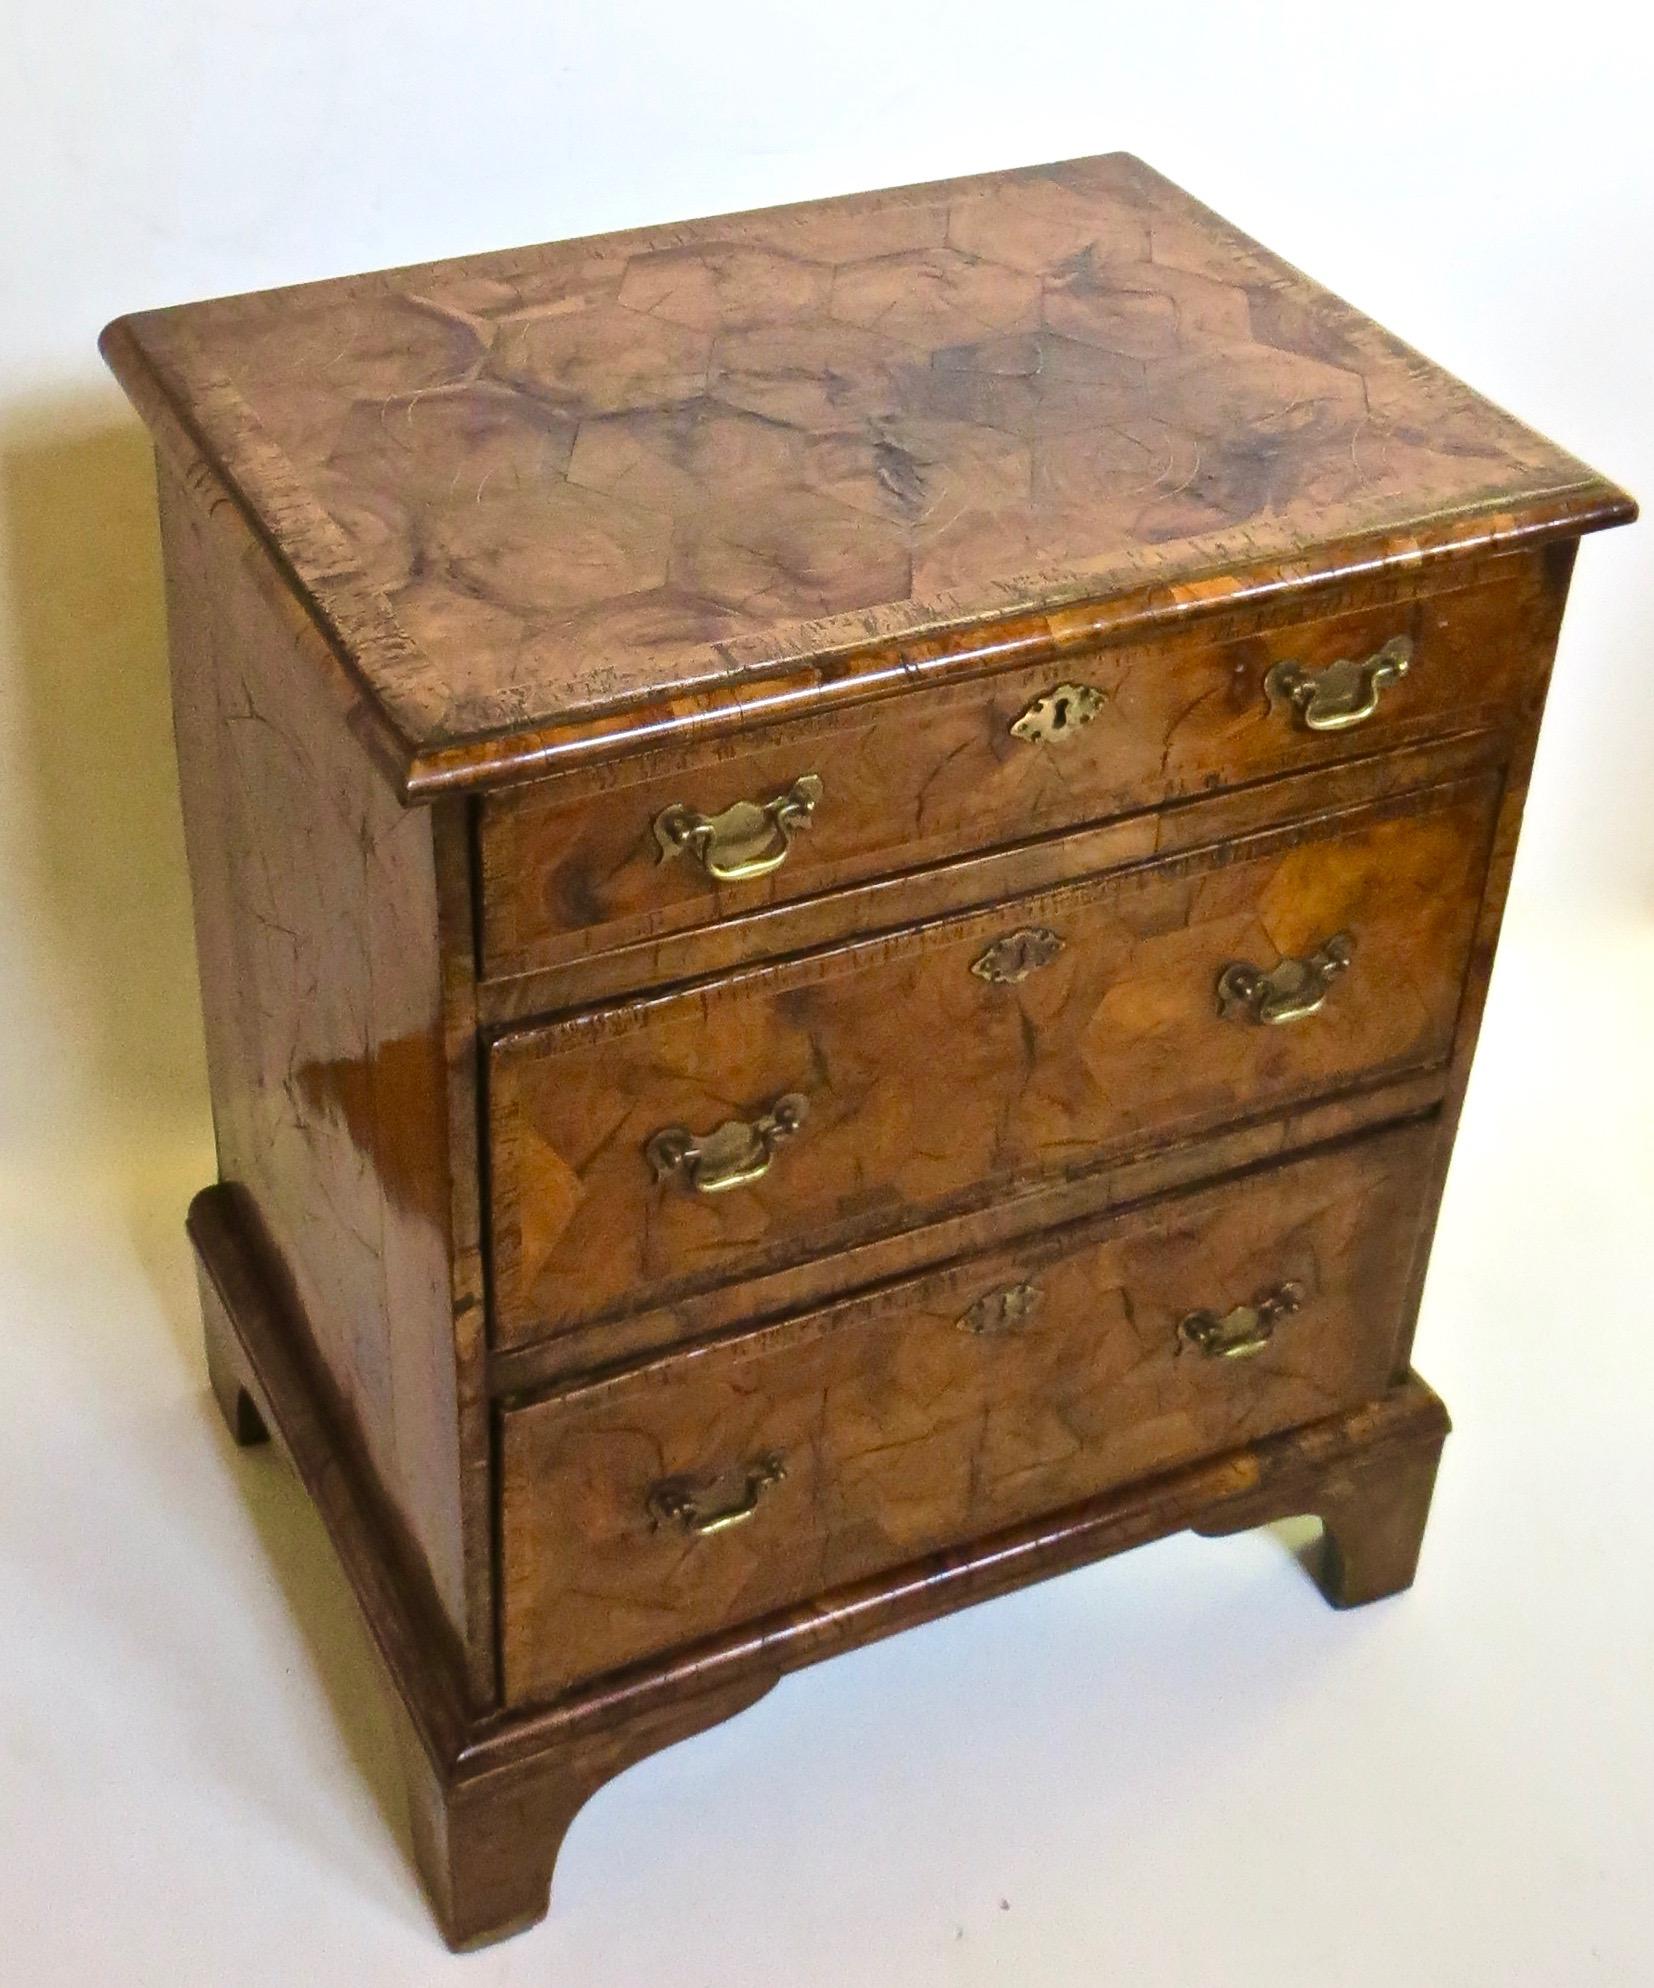 Highly Figured Walnut Laburnum Oyster Veneer Three Drawer Chest on four bracket feet, with later brass pulls and escutcheons; cross banding to the drawers and top; great surface and color, with pleasing mellow patina (see images); some elements